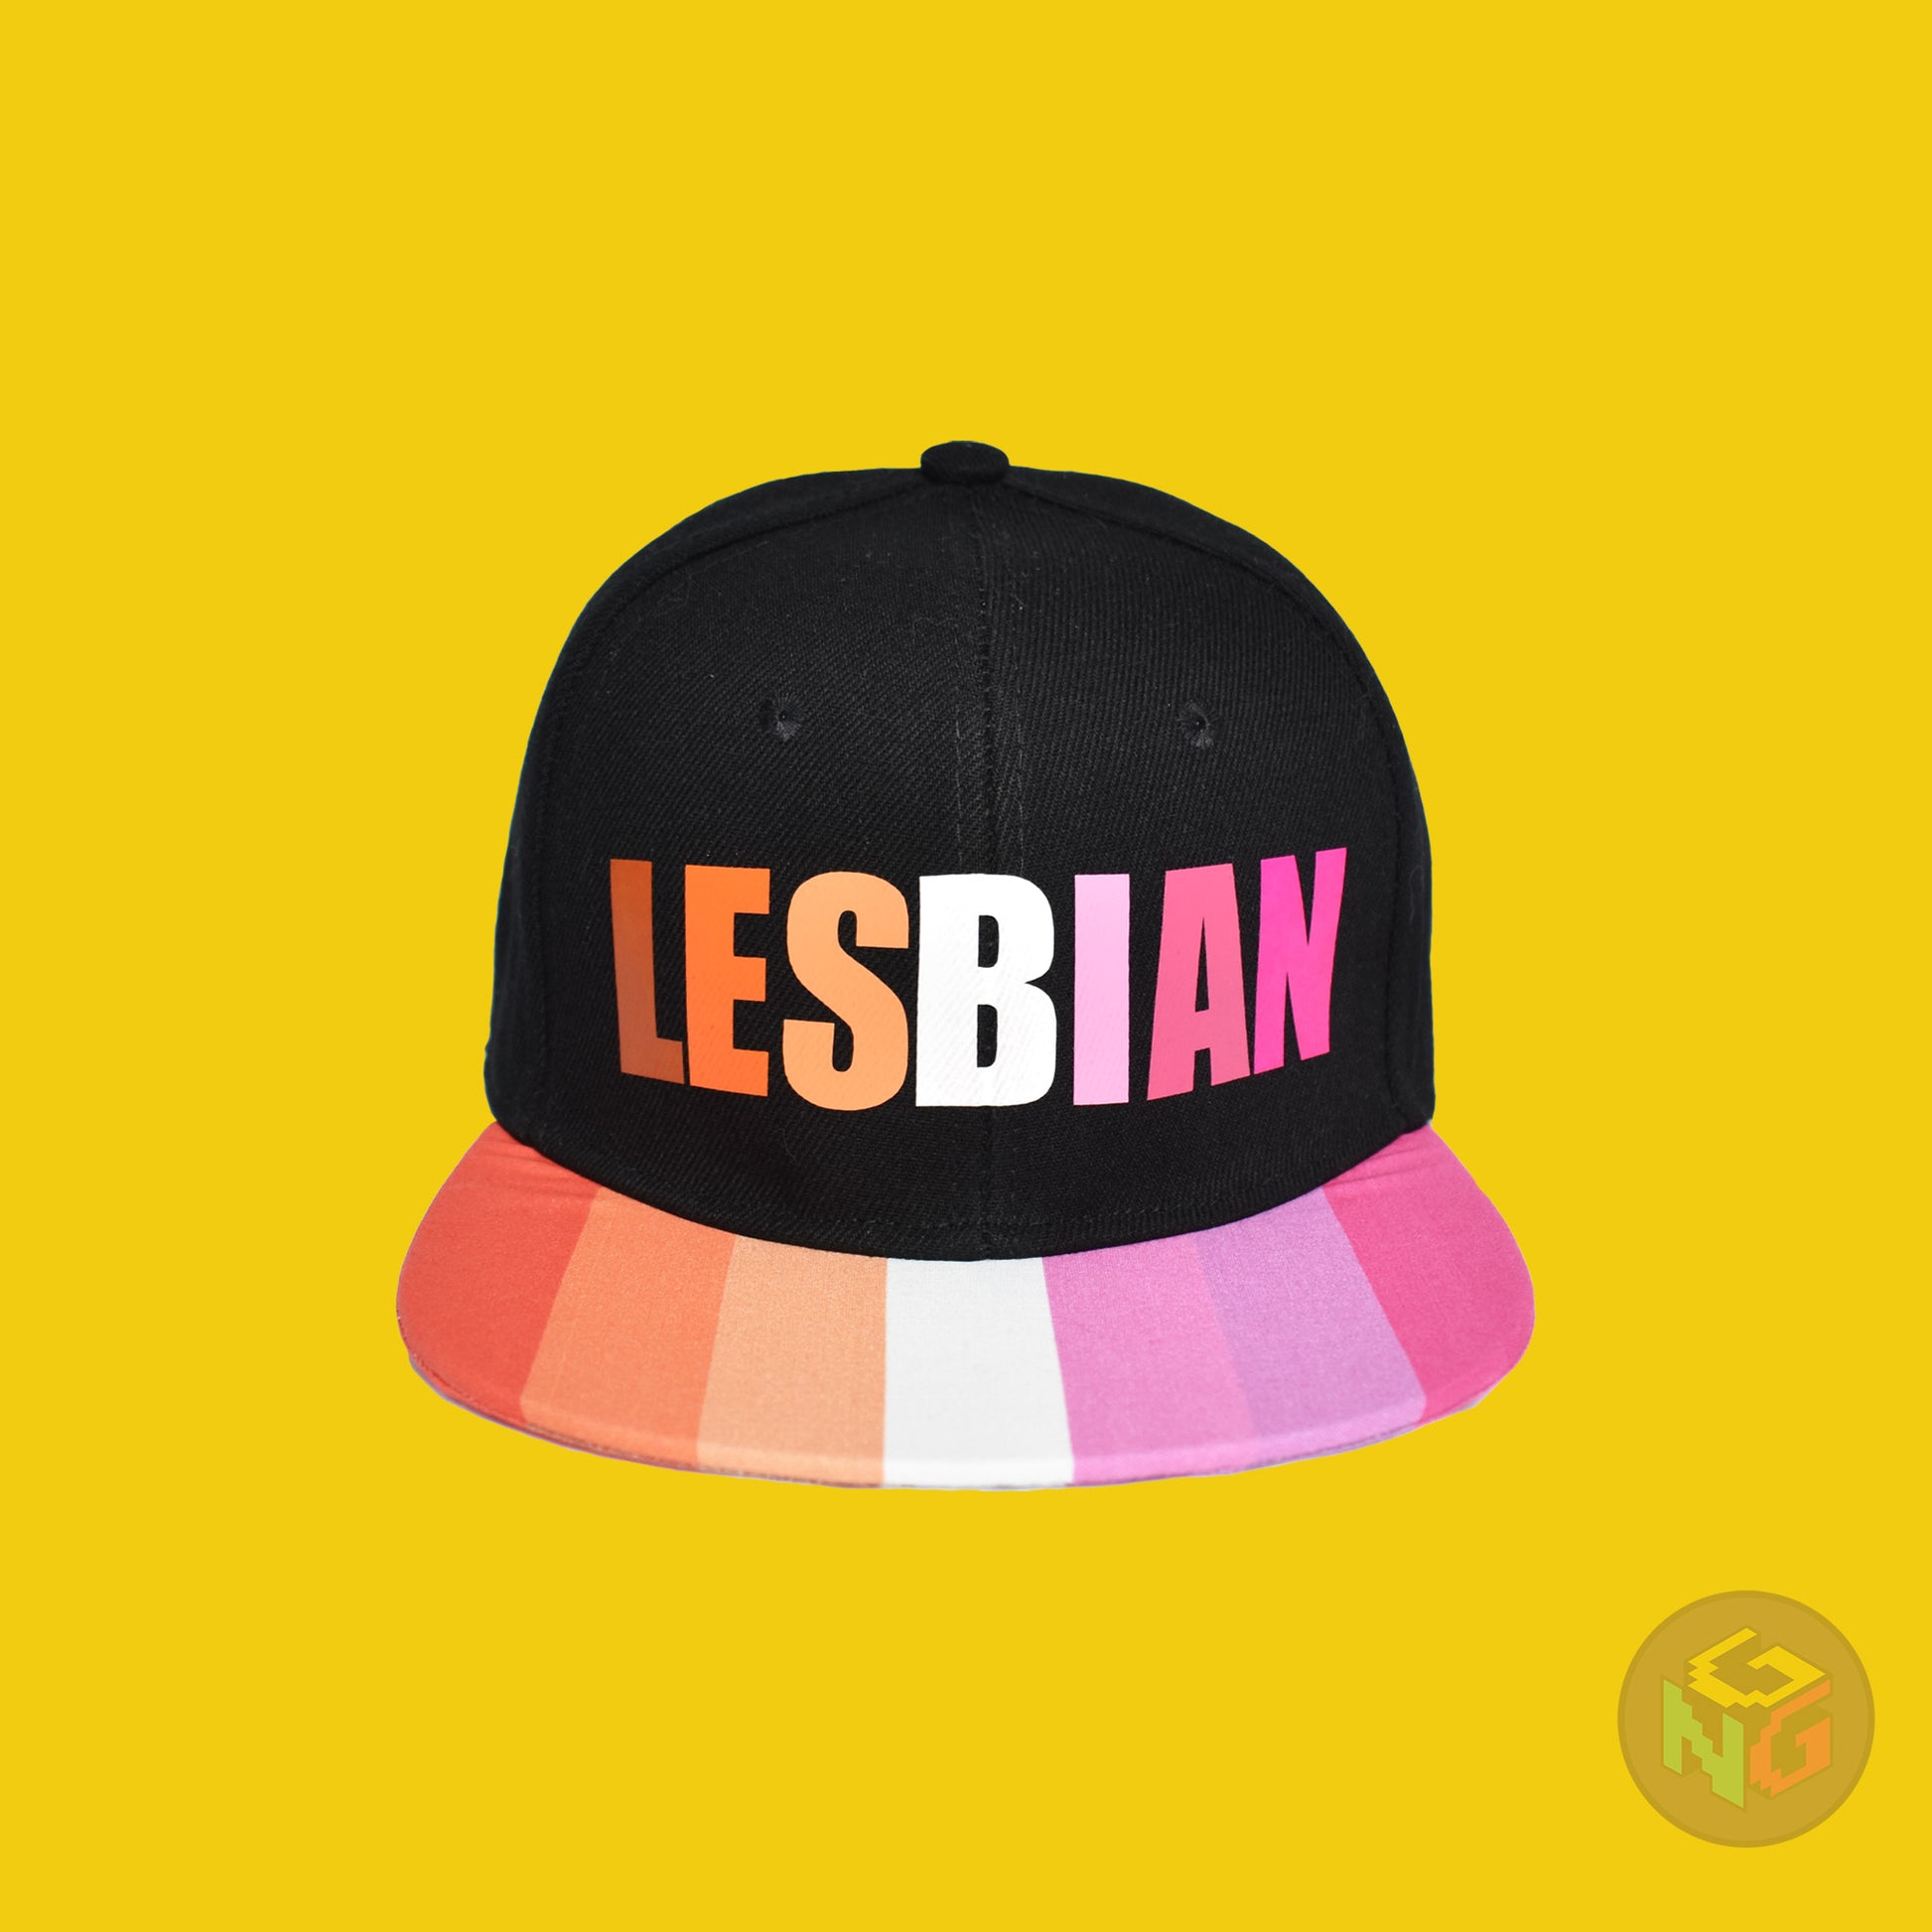 Black flat bill snapback hat. The brim has the lesbian pride flag on both sides and the front of the hat has the word “LESBIAN” in orange, pink, and white letters. Front view